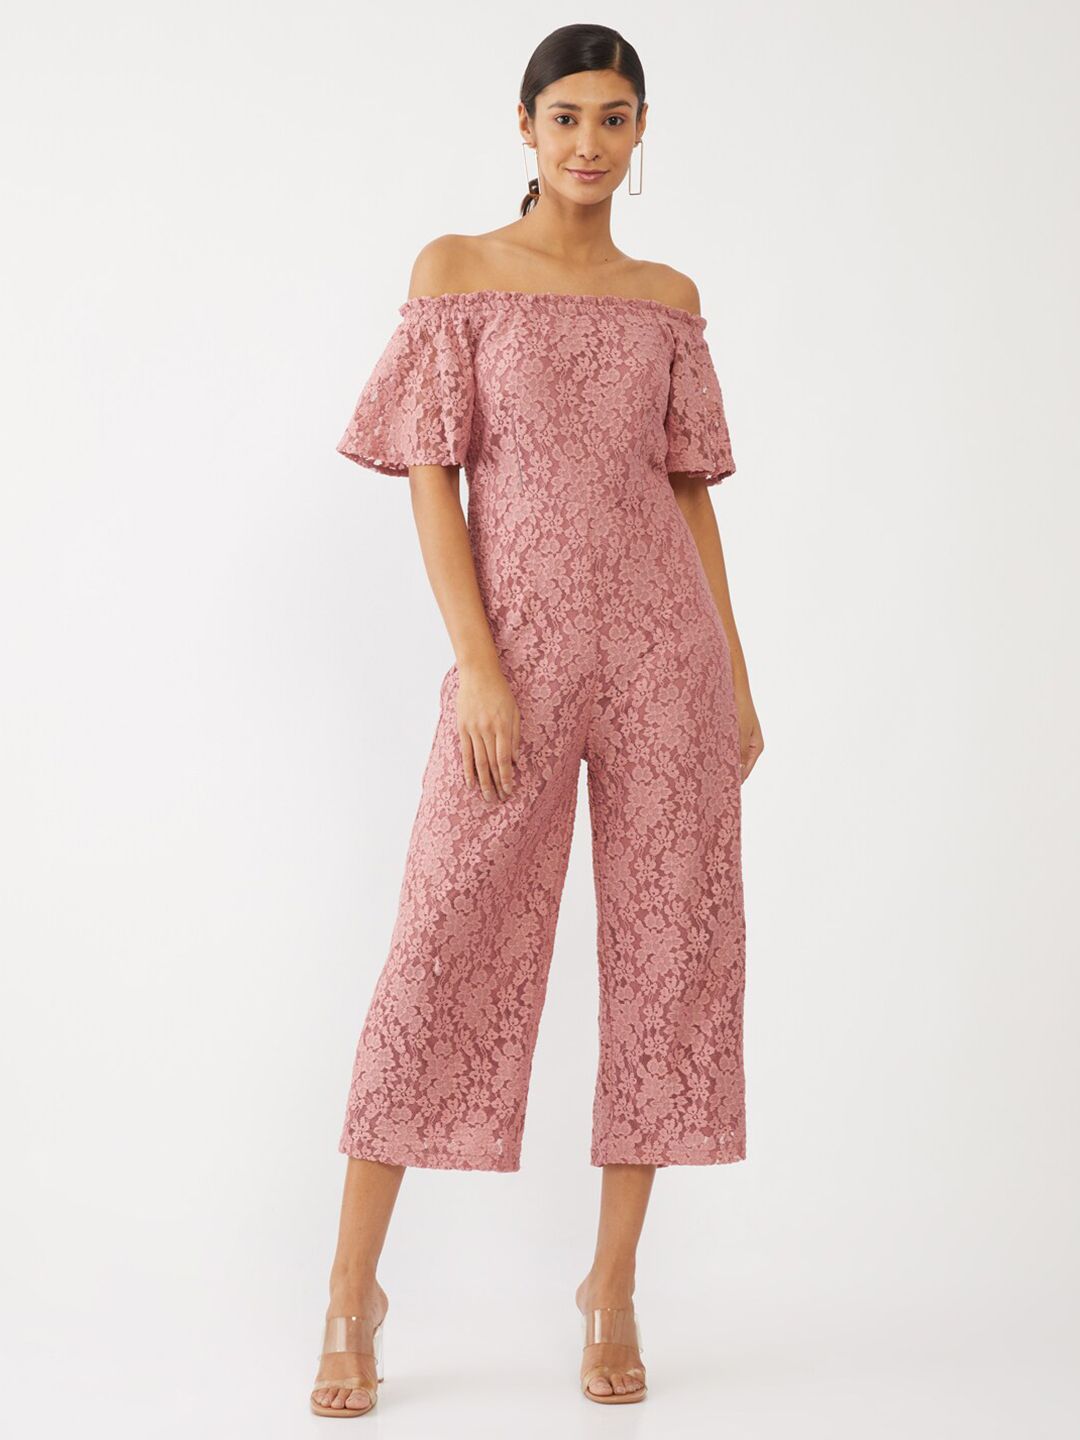 Zink London Pink Lace Culotte Jumpsuit Price in India